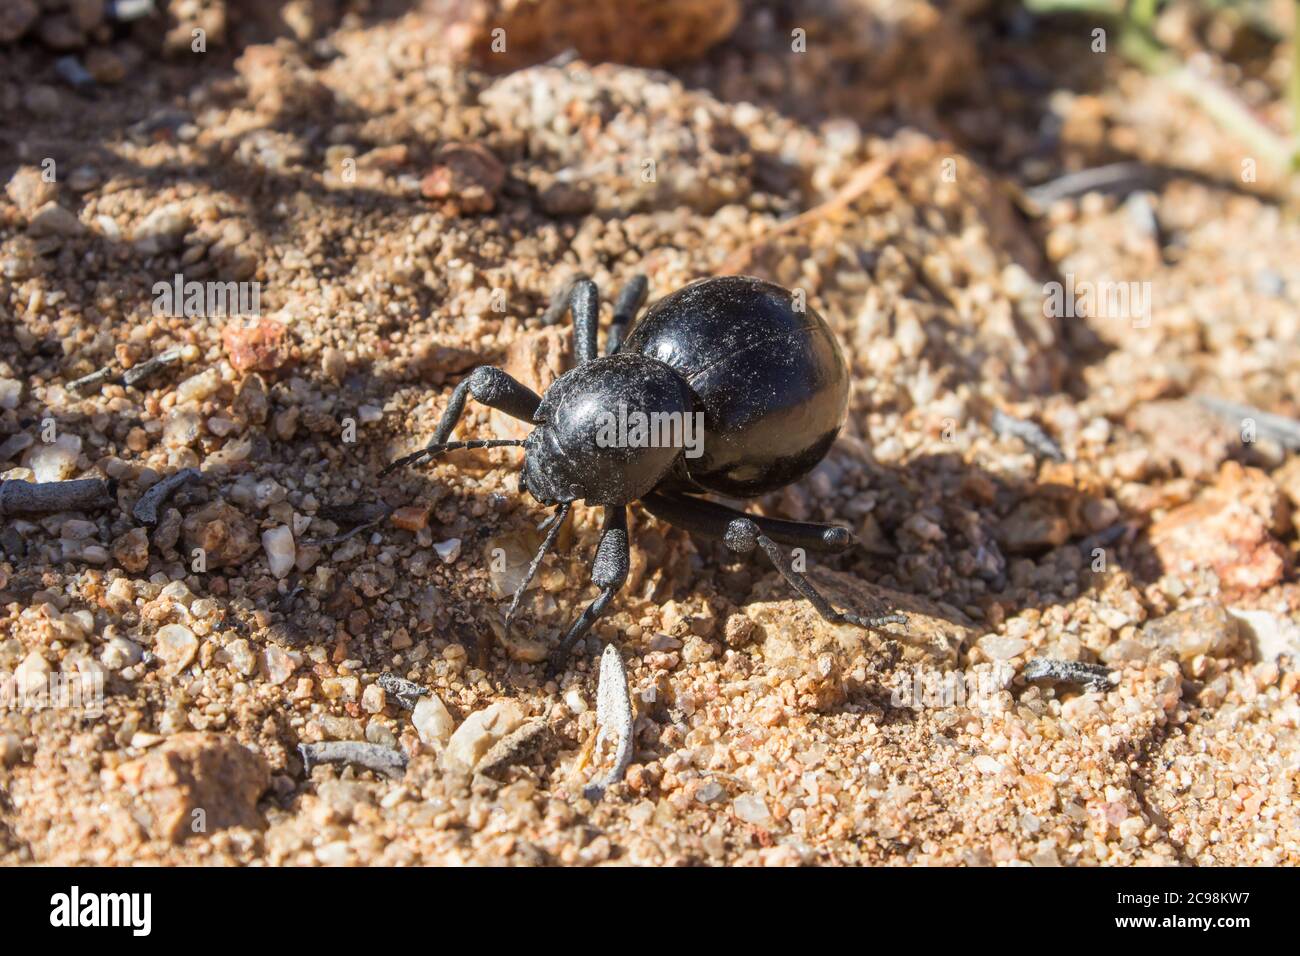 A Small black Helmet Darkling Beetle, known locally as a toktokkie, in the Goegap Nature reserve just outside the town of Springbok in South Africa Stock Photo